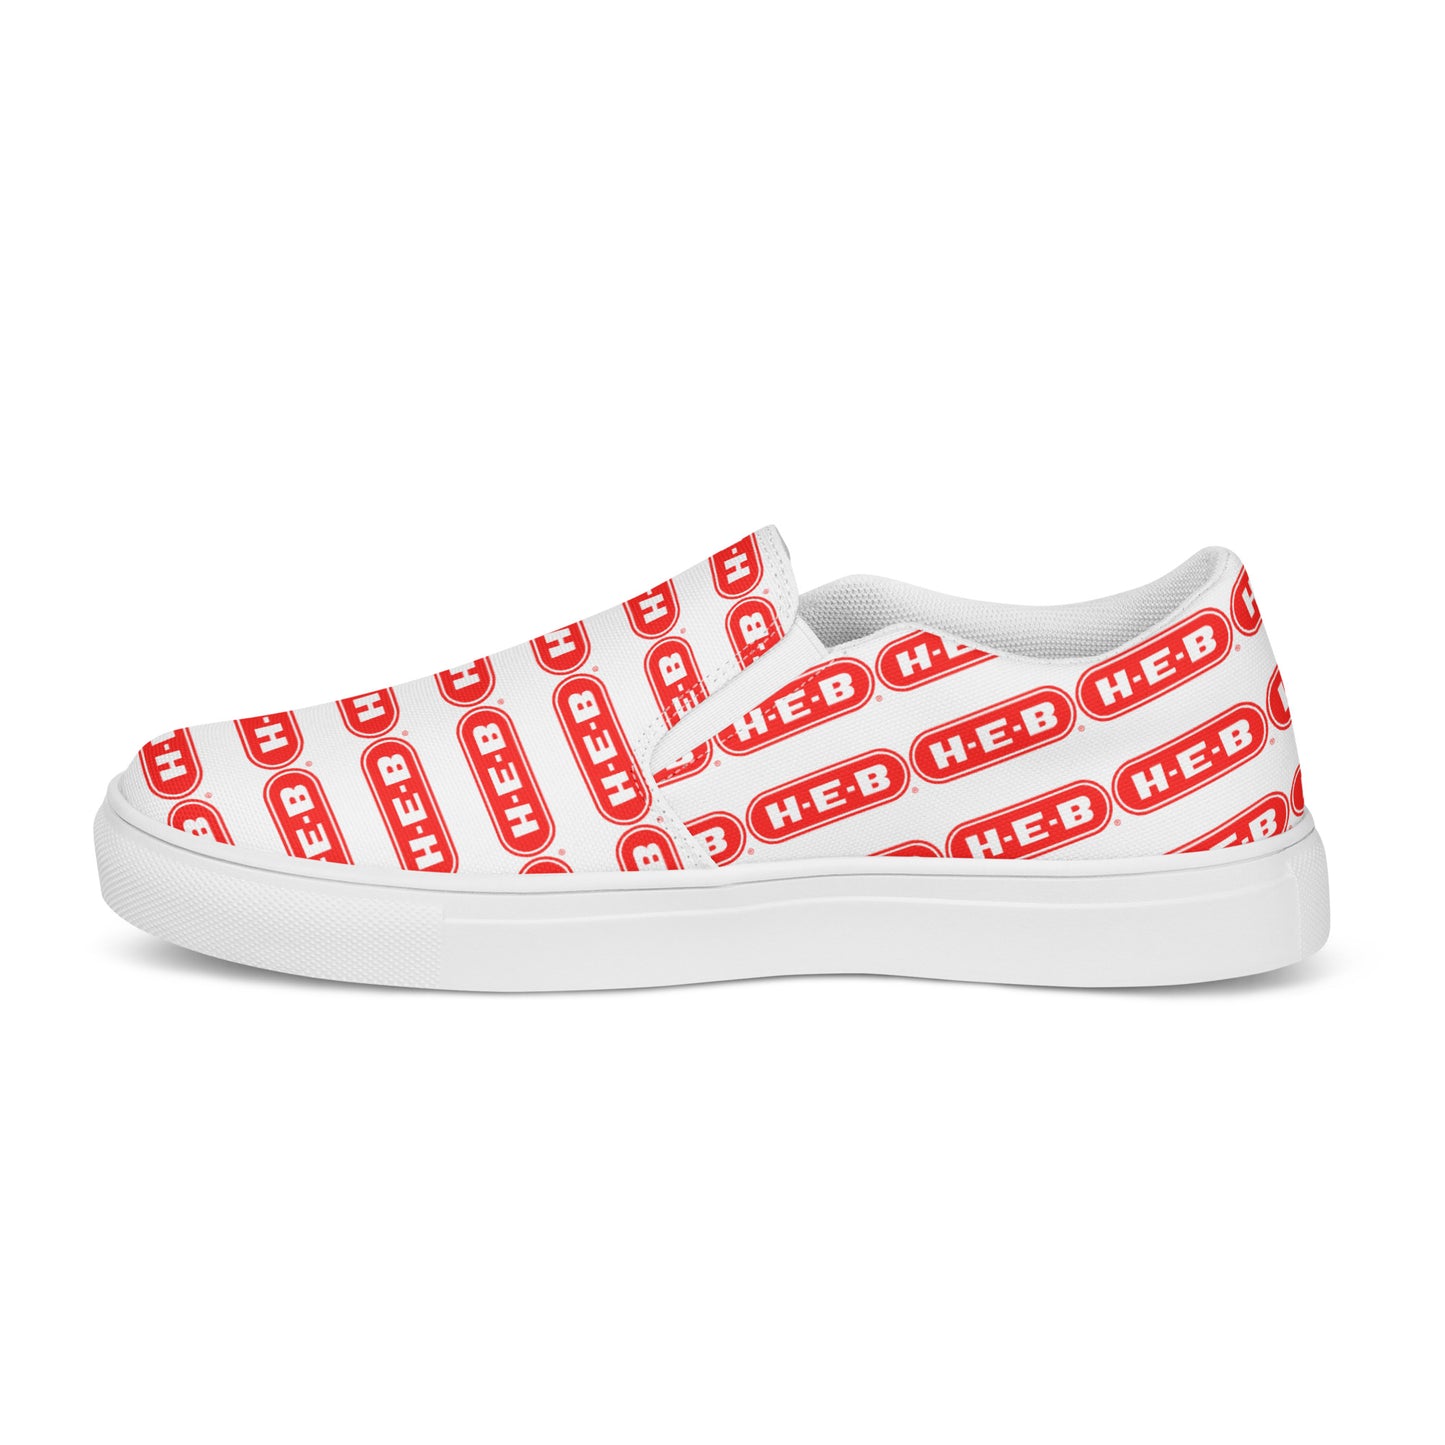 HEB Branded Women’s slip-on canvas shoes CedarHill Country Market